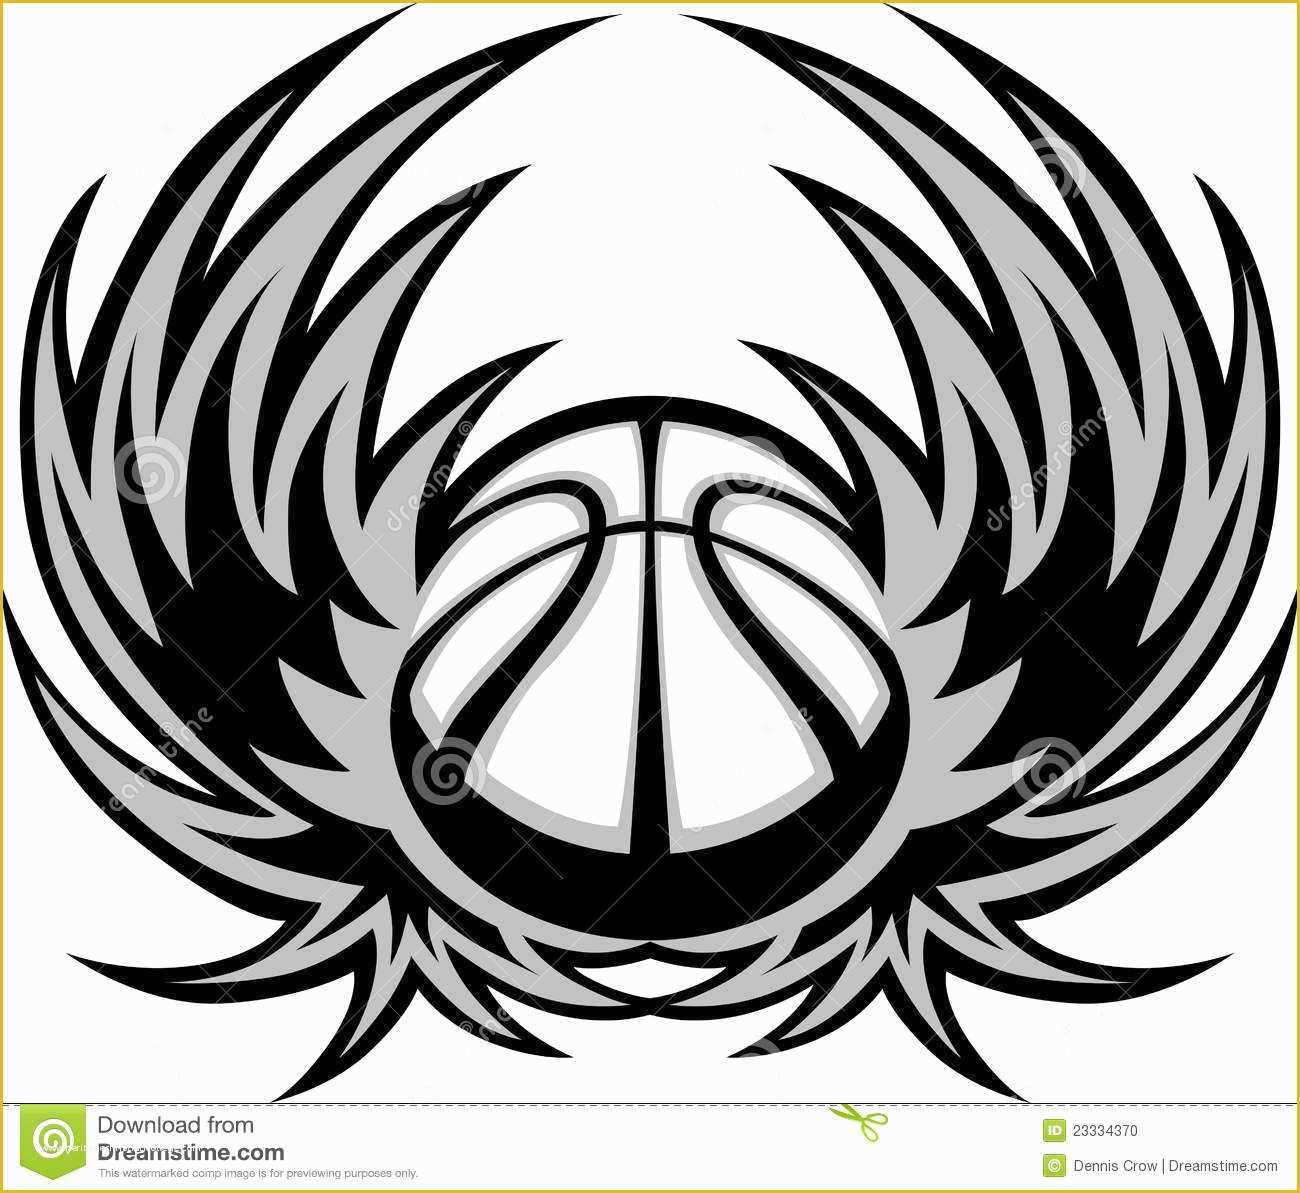 Basketball Logo Template Free Of Basketball Template with Wings Stock Vector Image